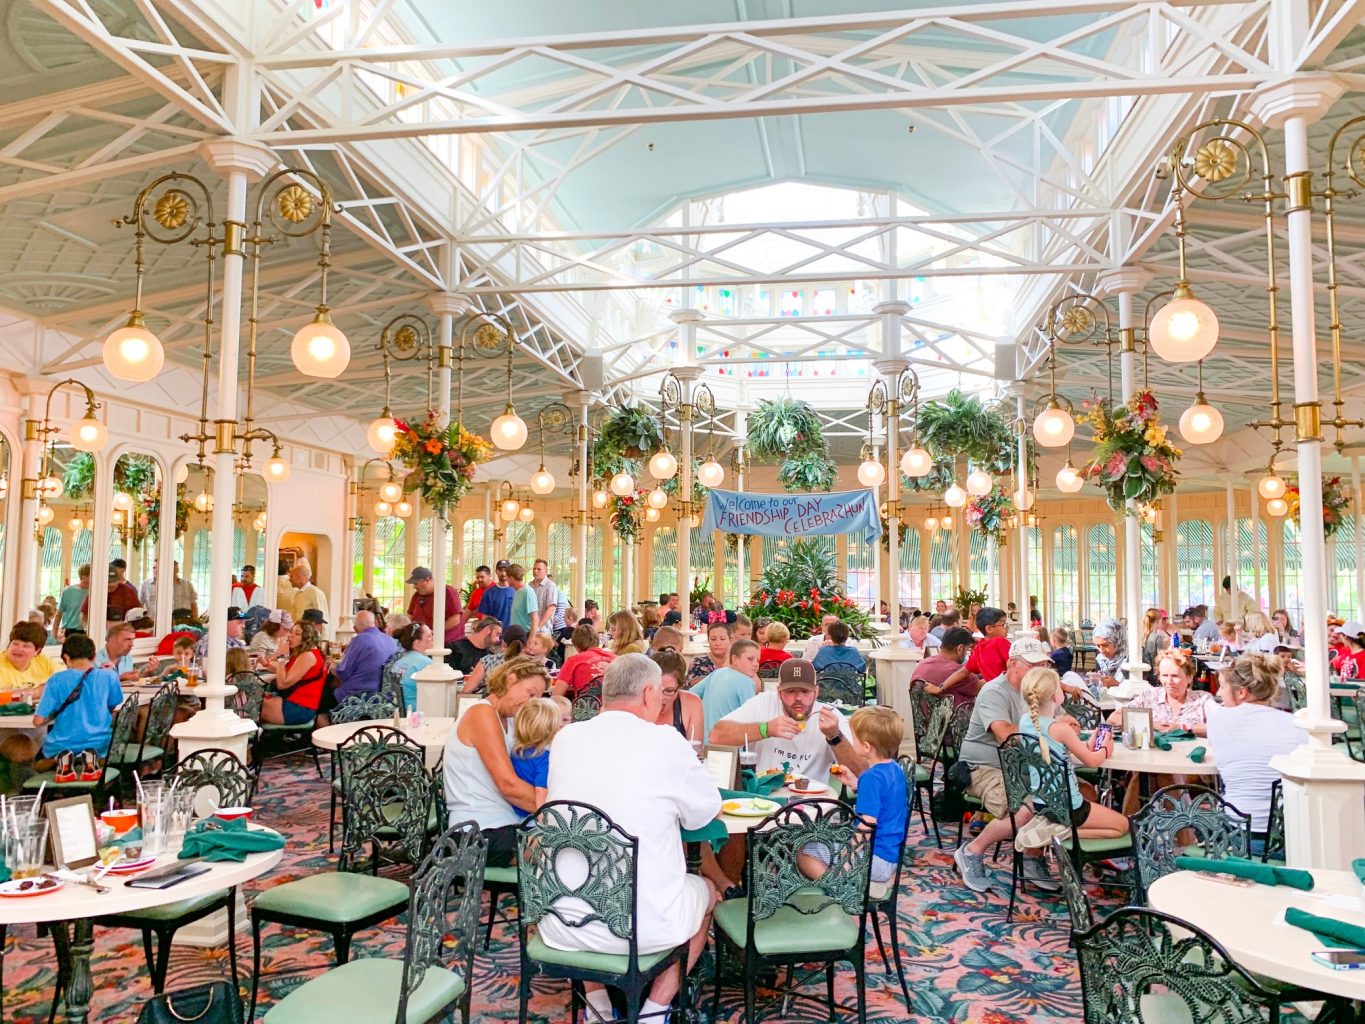 The greenhouse-like dining area is filled with people Magic Kingdom restaurants, which means it is one of the best Magic Kingdom restaurants of course! 